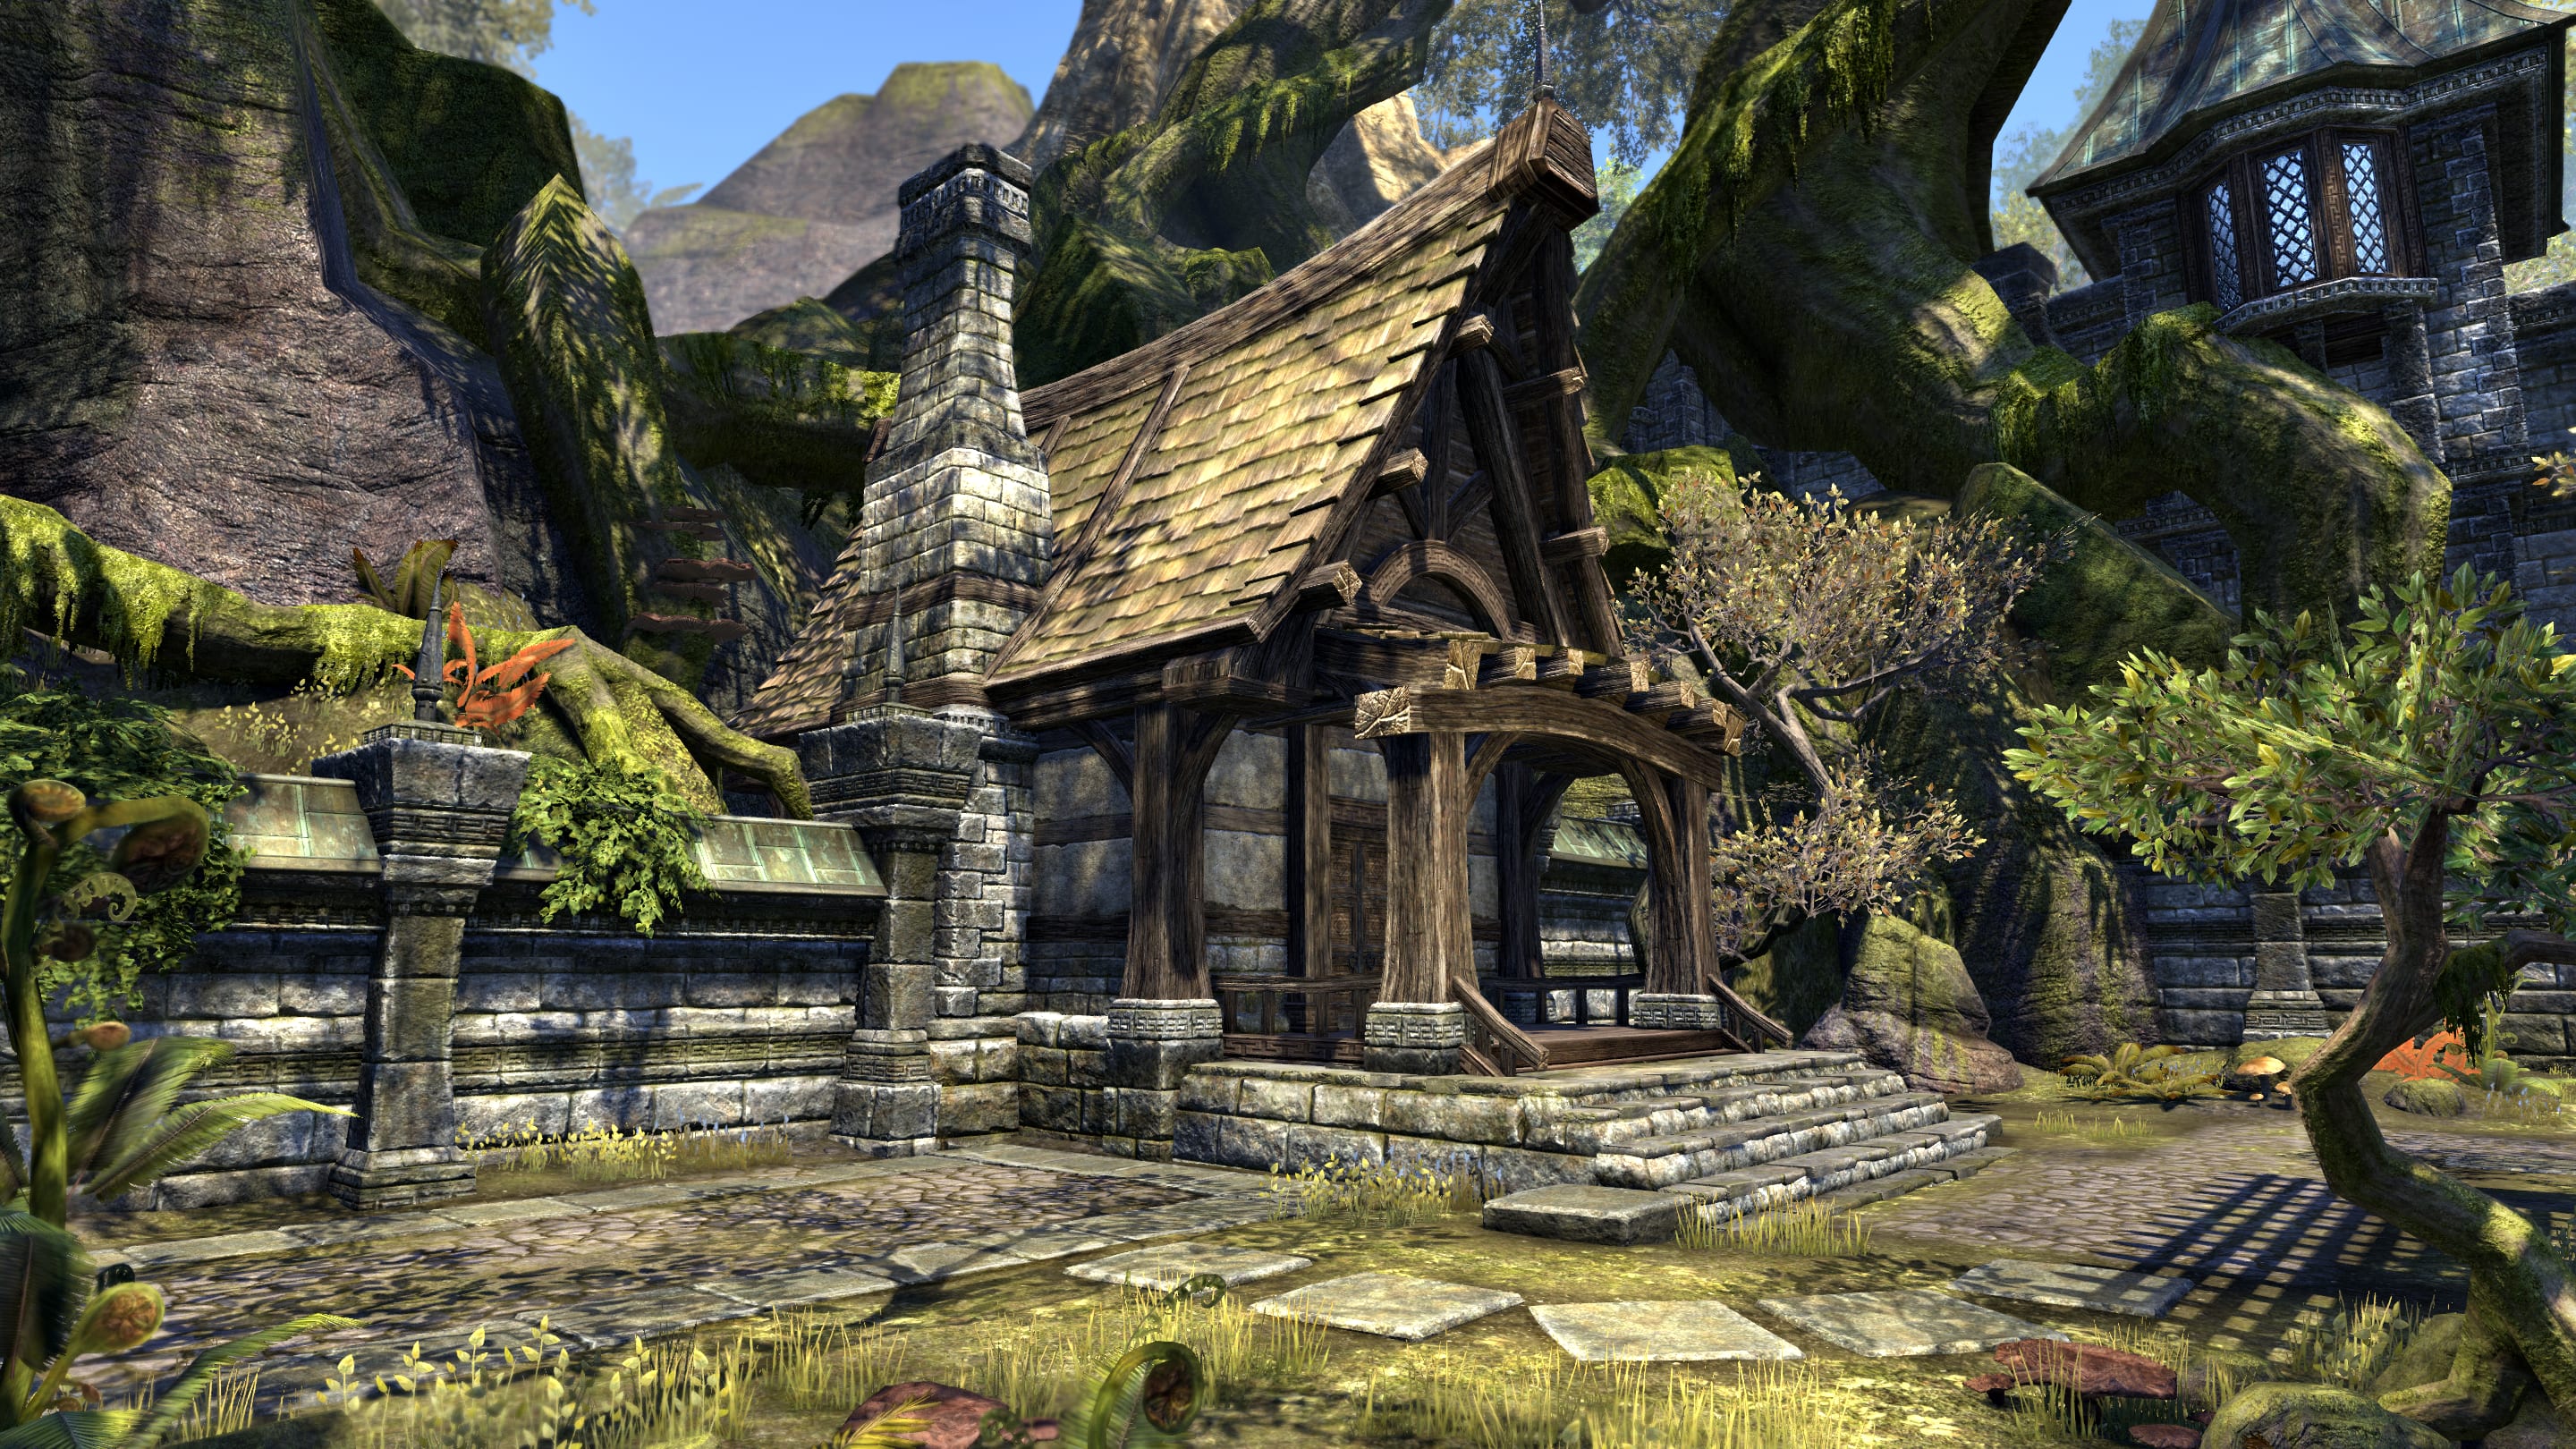 Skyrim Mod Brings Real Estate Agents to Tamriel